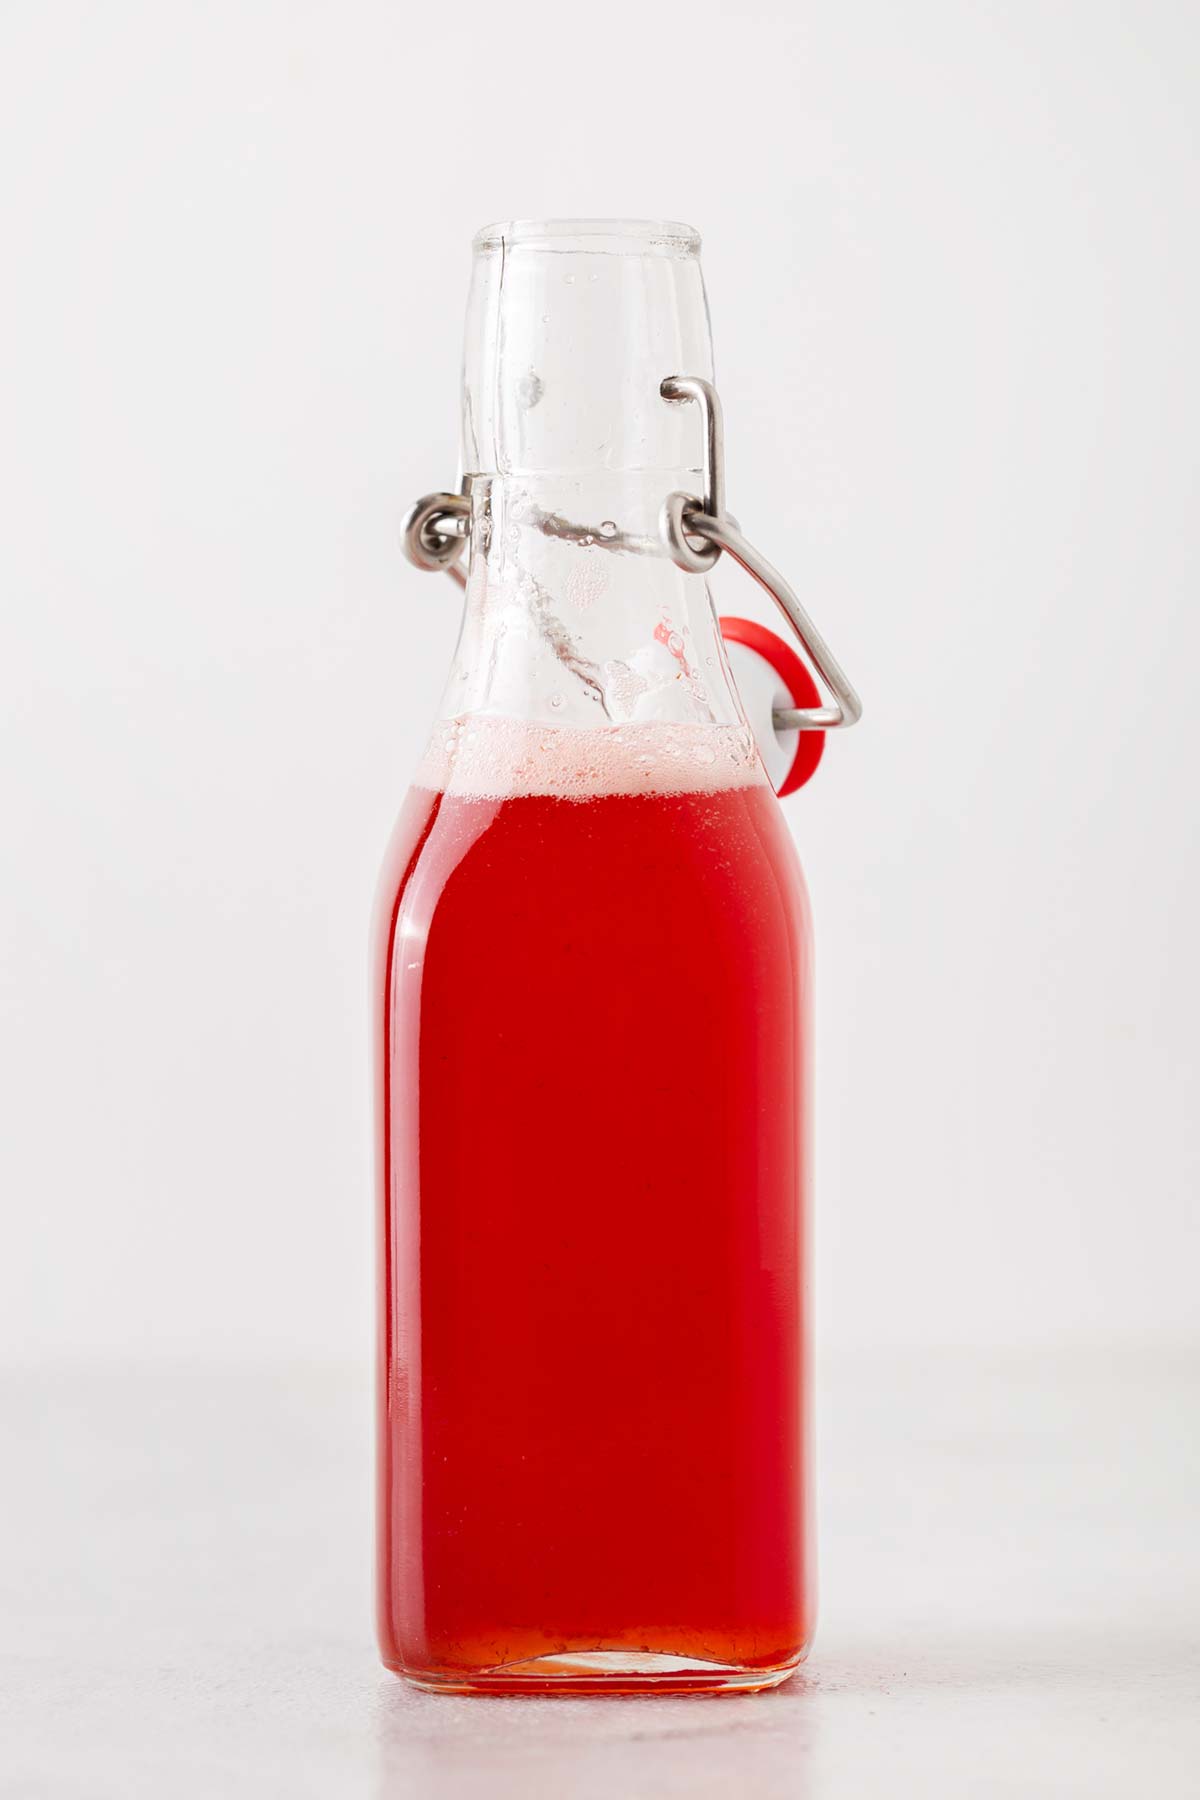 Homemade strawberry syrup in a glass bottle.